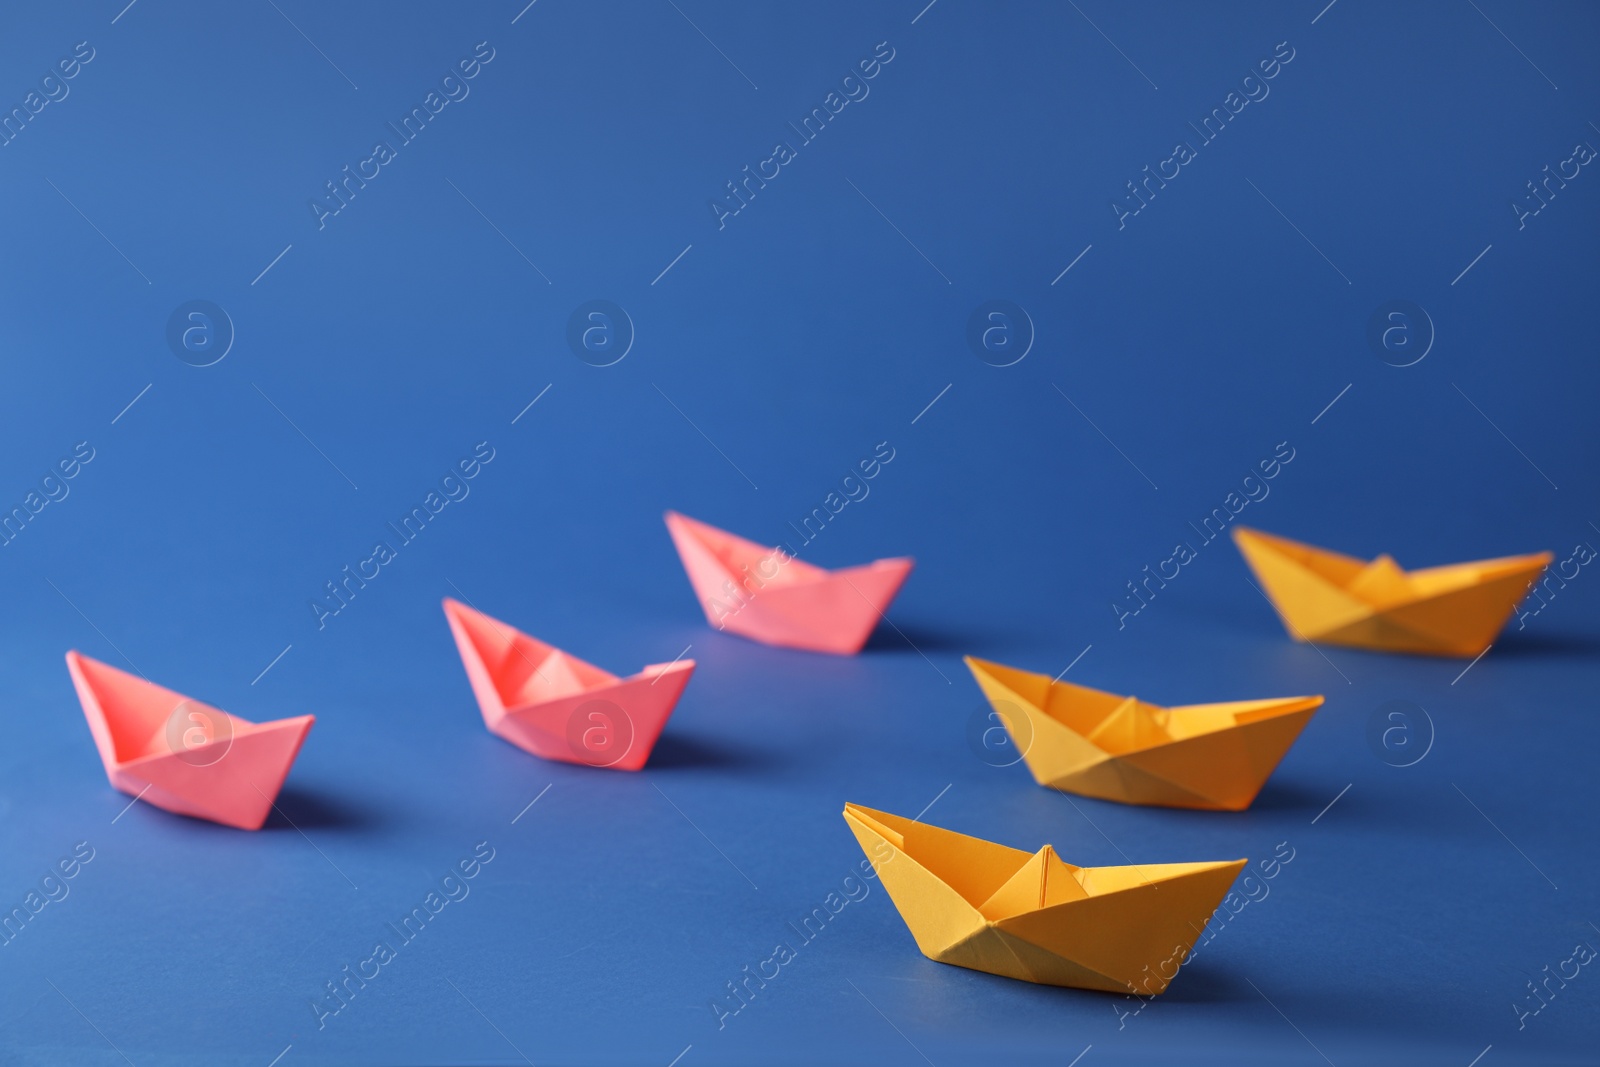 Photo of Many pink and orange handmade paper boats on blue background. Origami art